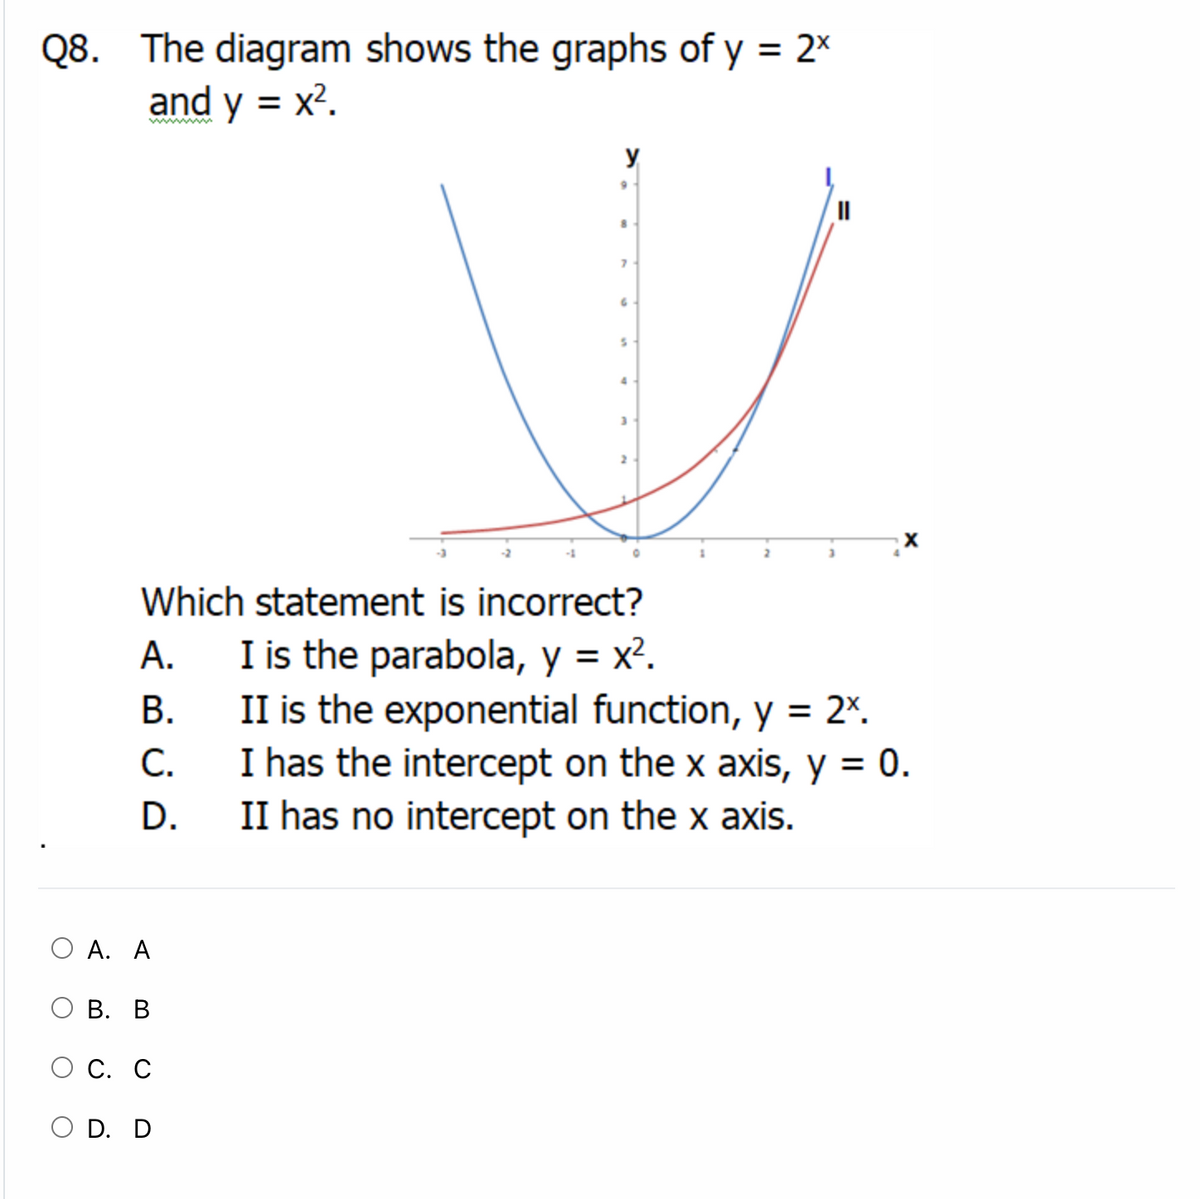 Q8. The diagram shows the graphs of y = 2x
and y = x².
y
II
X
Which statement is incorrect?
А.
I is the parabola, y = x².
II is the exponential function, y = 2%.
I has the intercept on the x axis, y = 0.
II has no intercept on the x axis.
B.
С.
D.
О А. А
В. В
О С. С
O D. D
